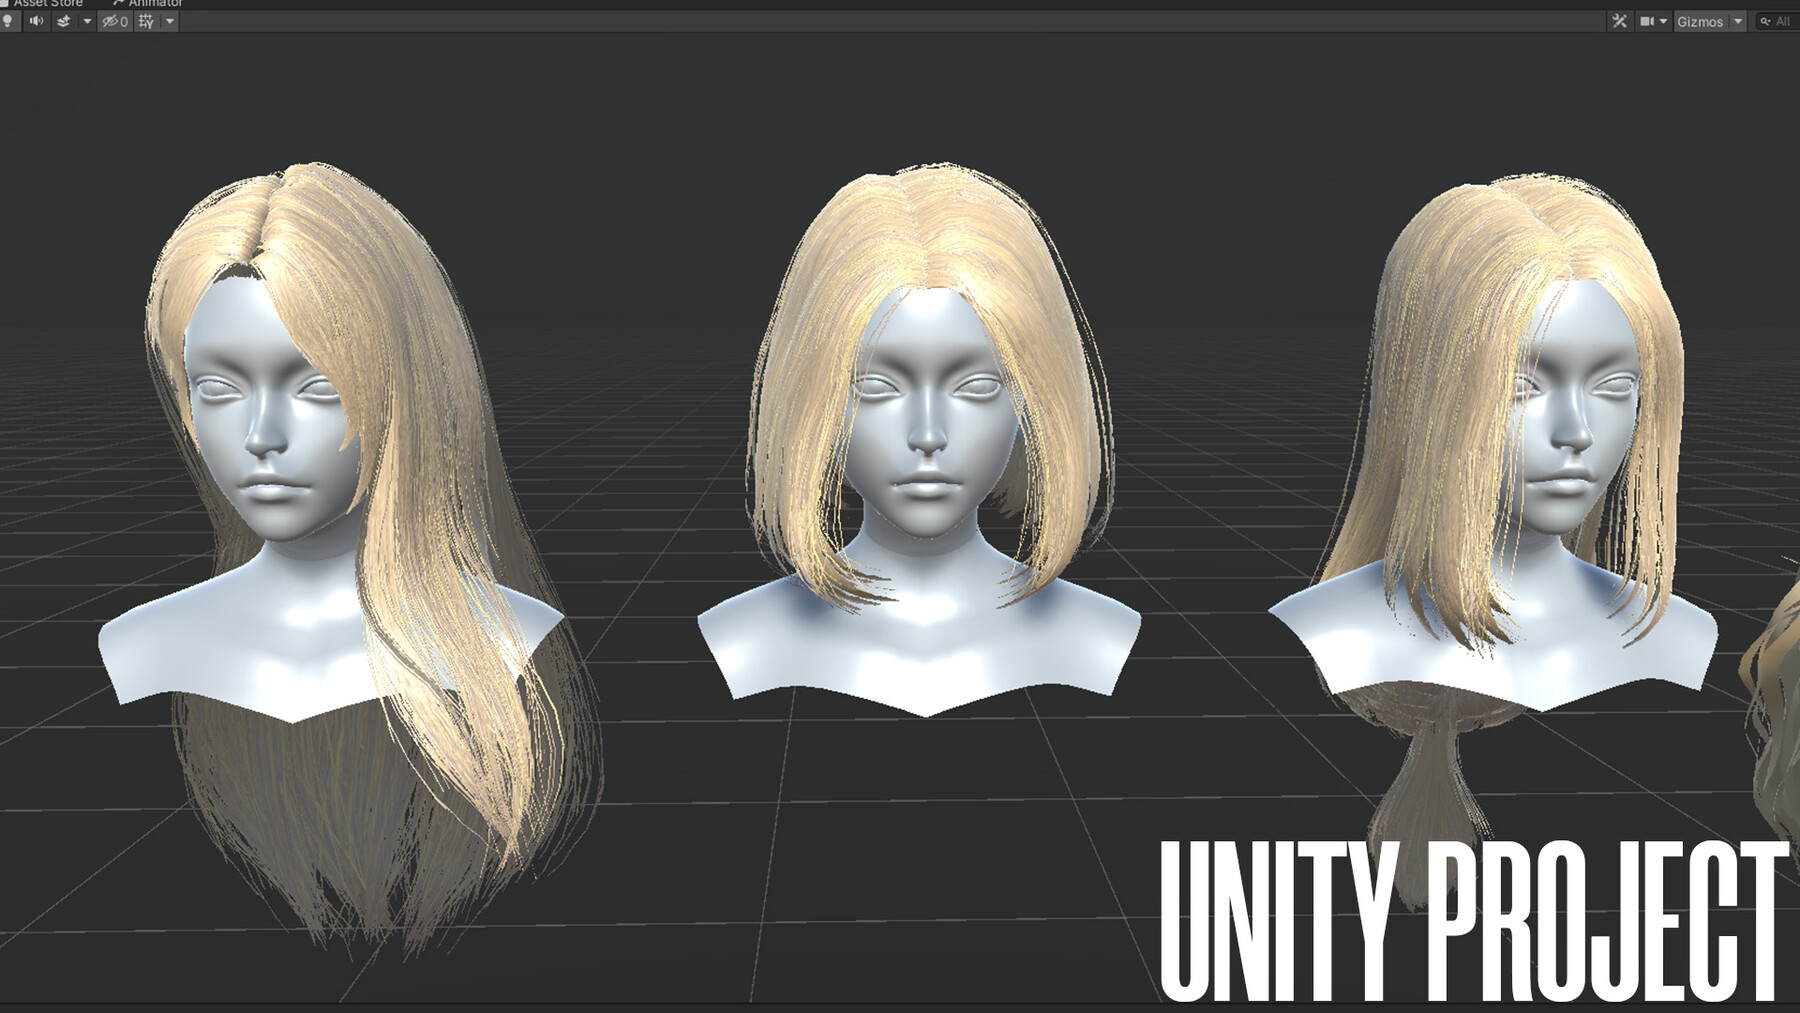 ArtStation - Female hair 4 colors low poly